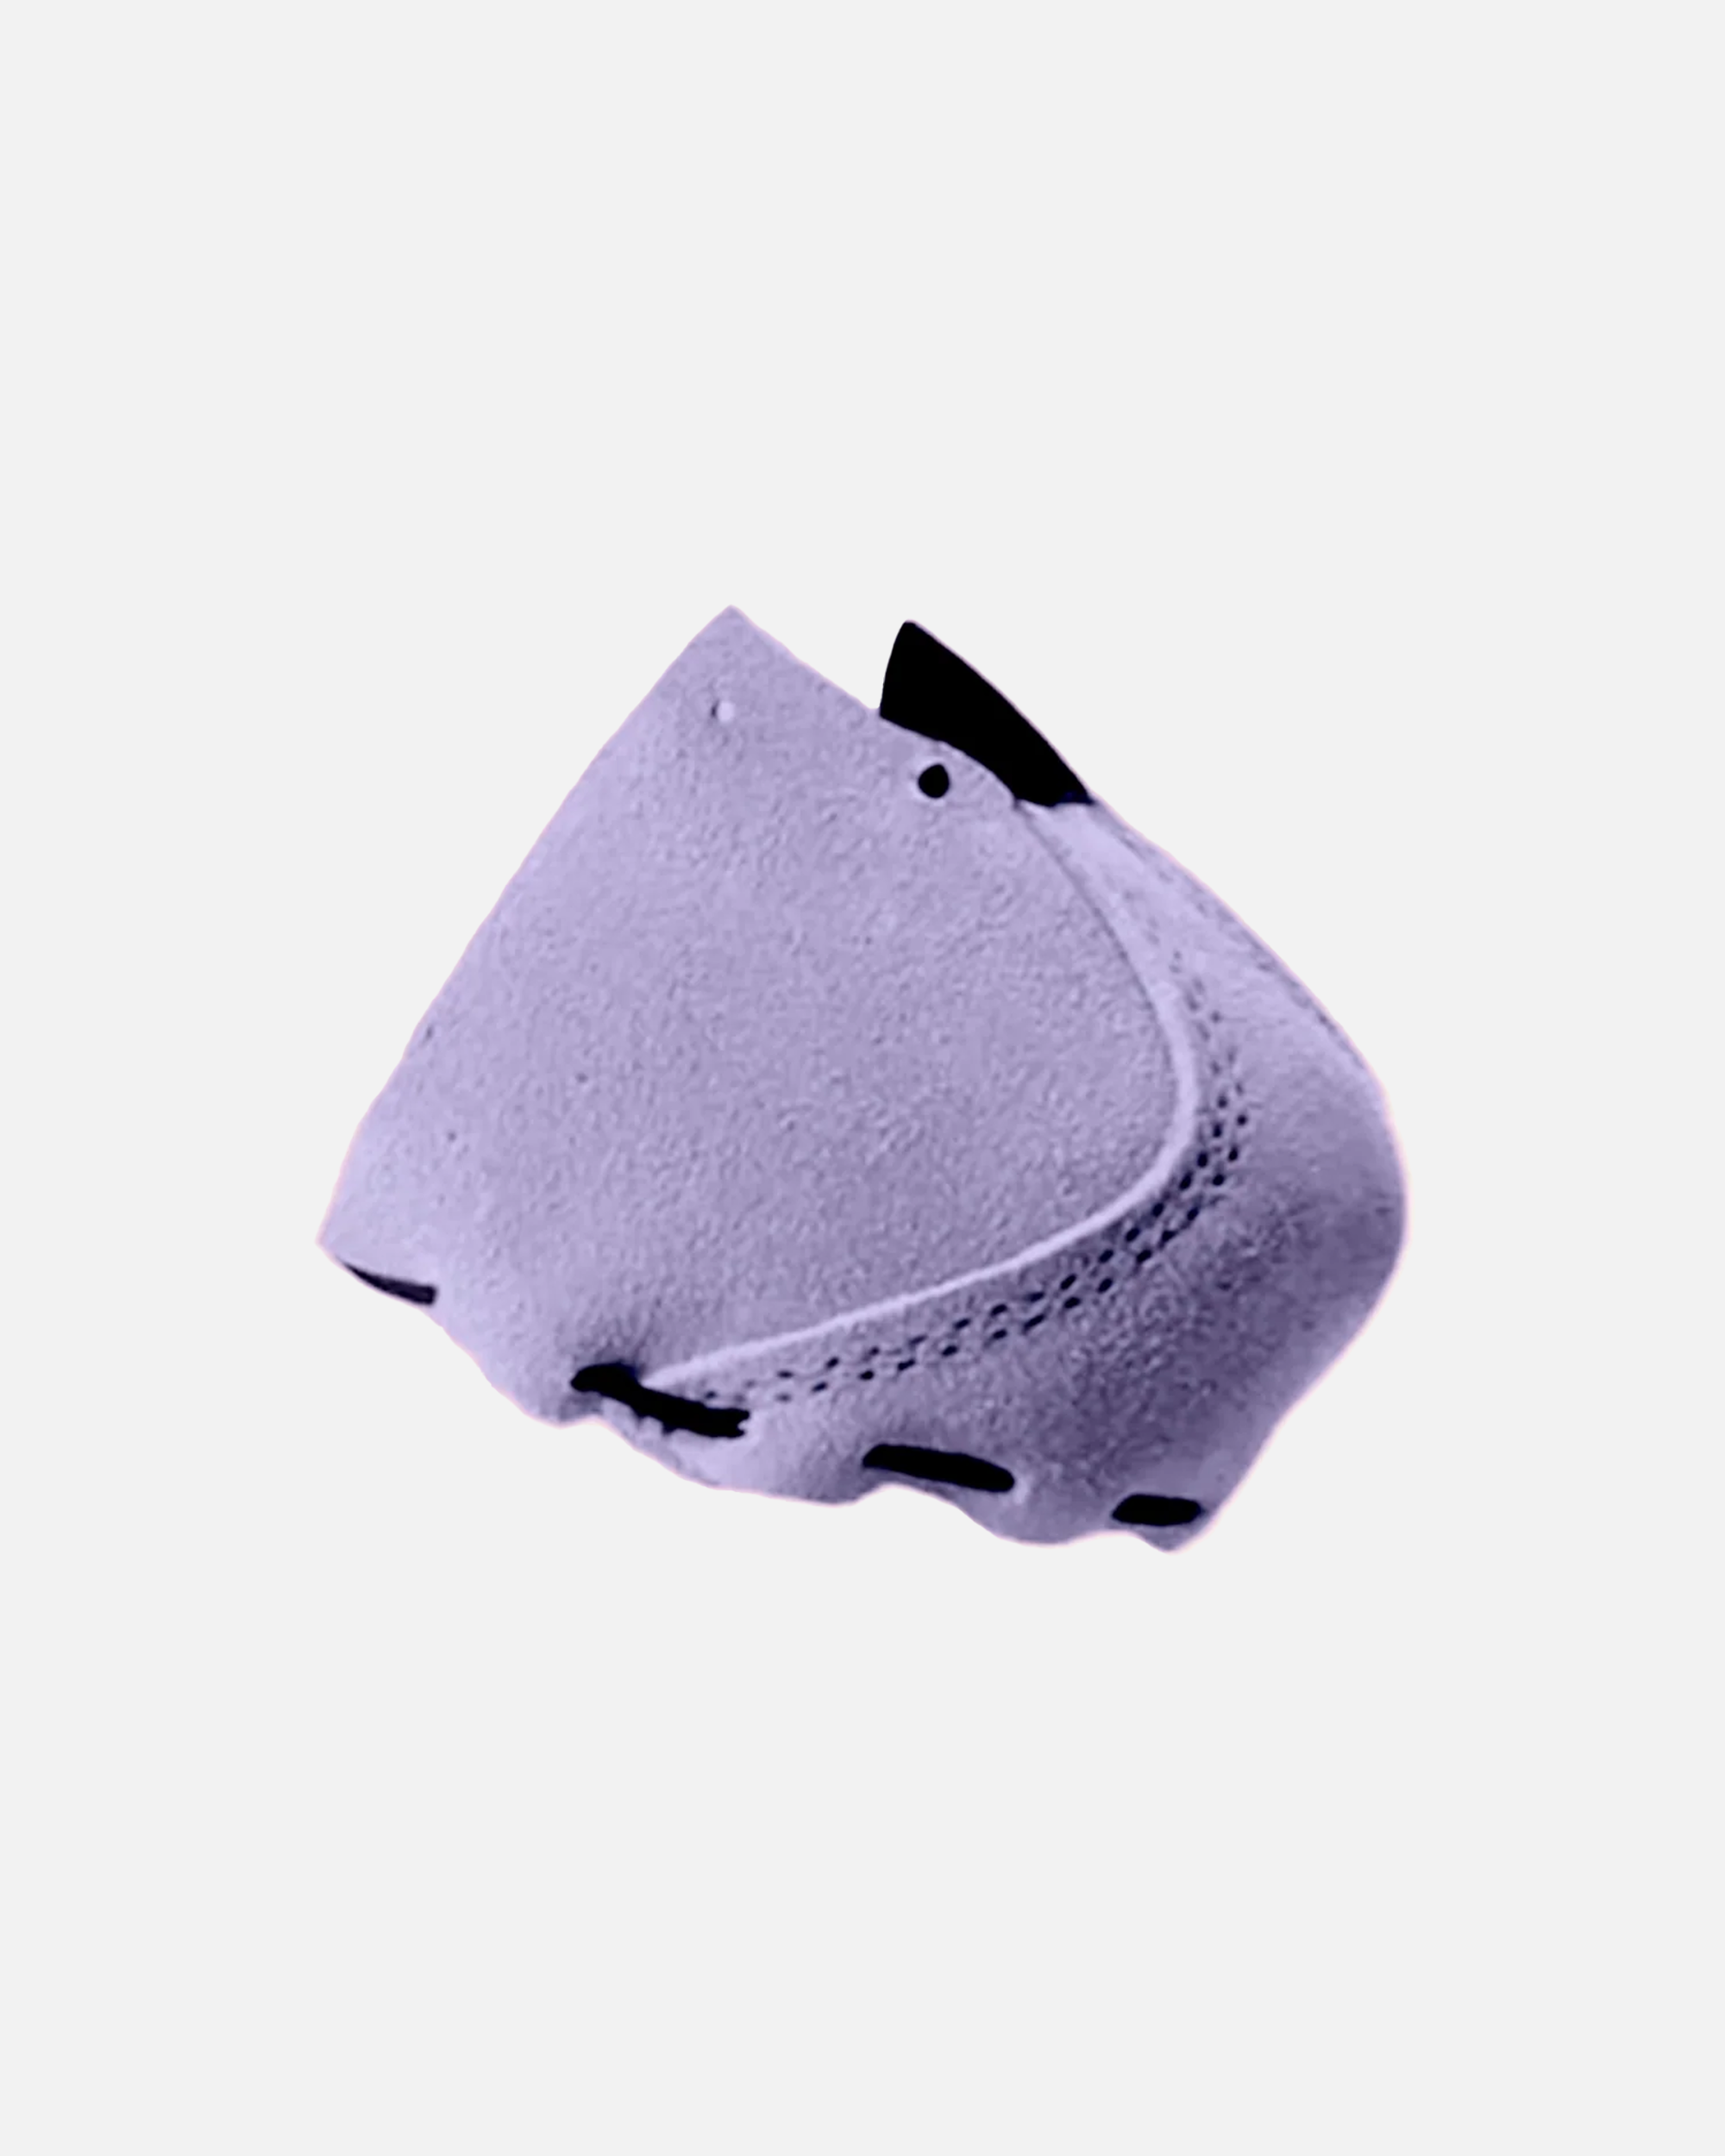 1 pair of toe guards (suede leather)